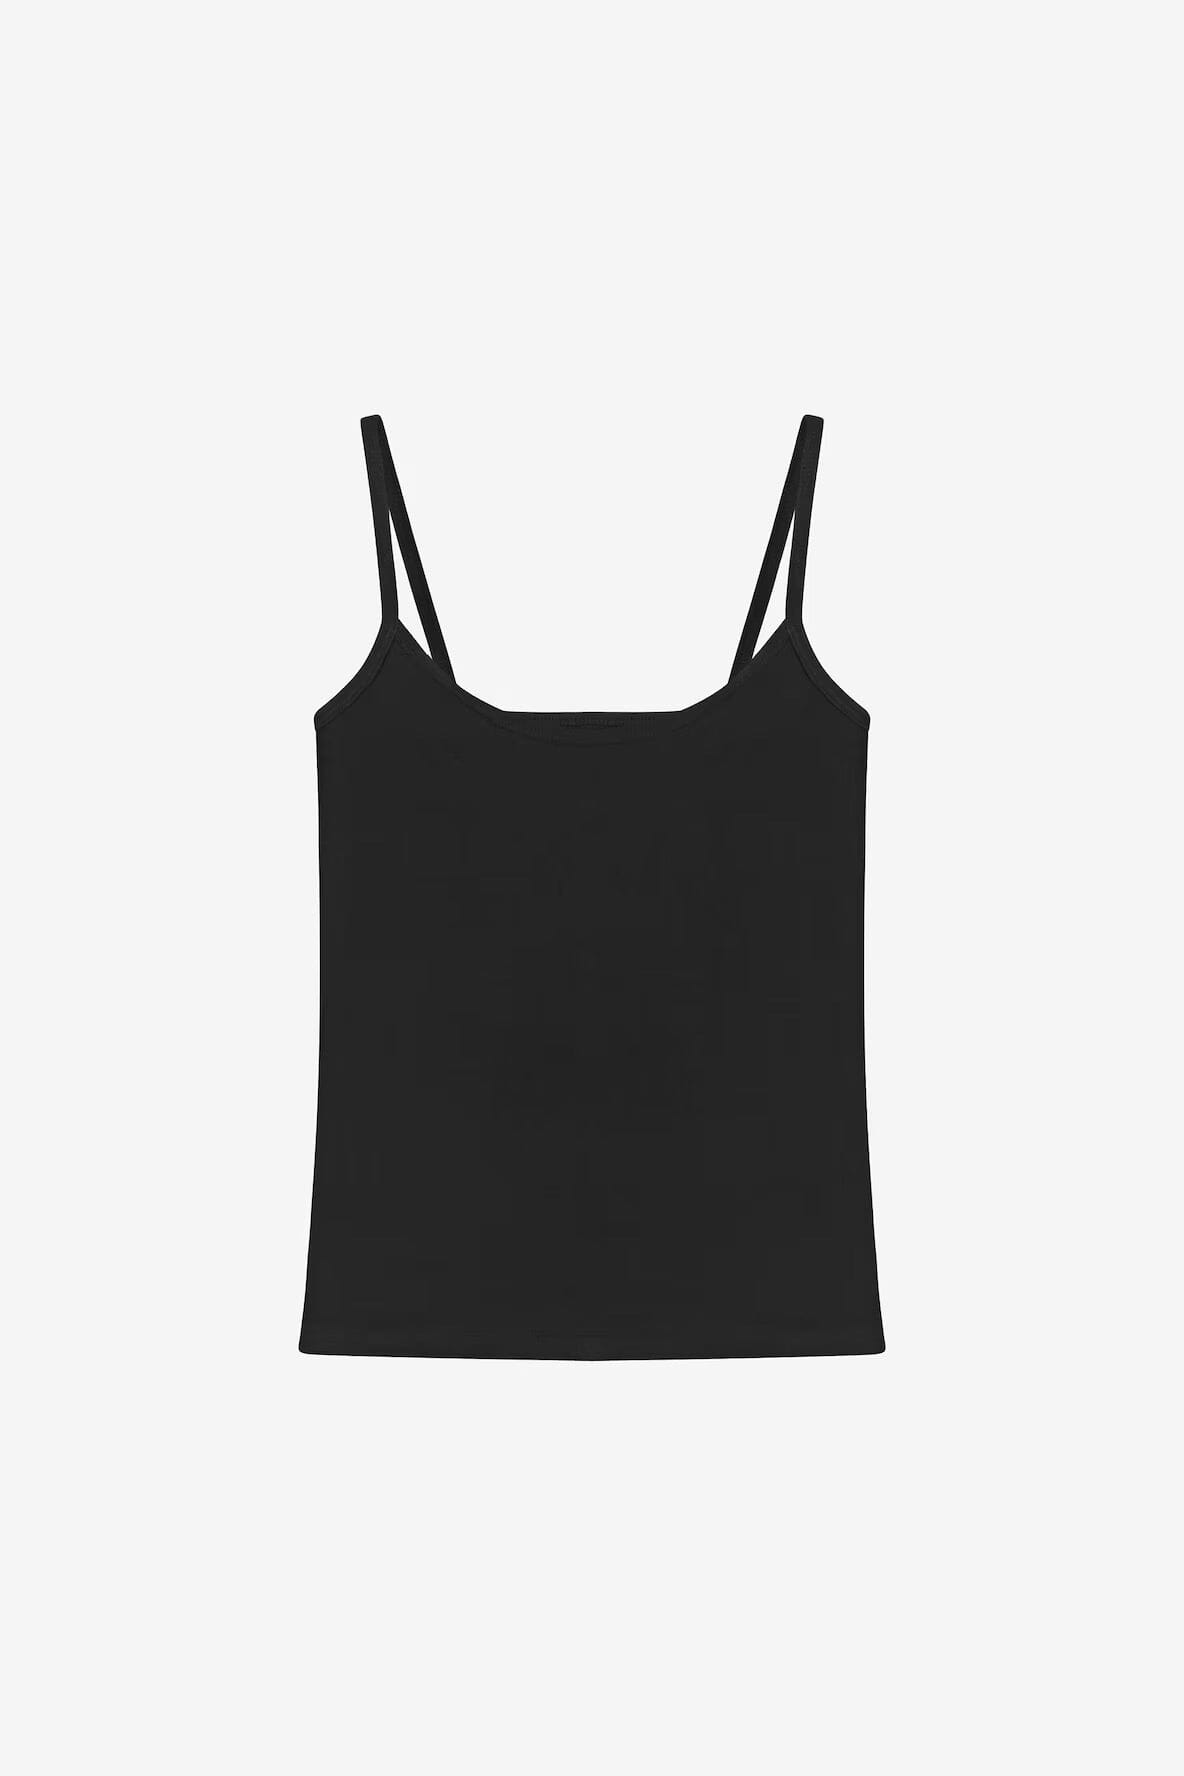 Bread and Boxers Singlet Black T-shirt